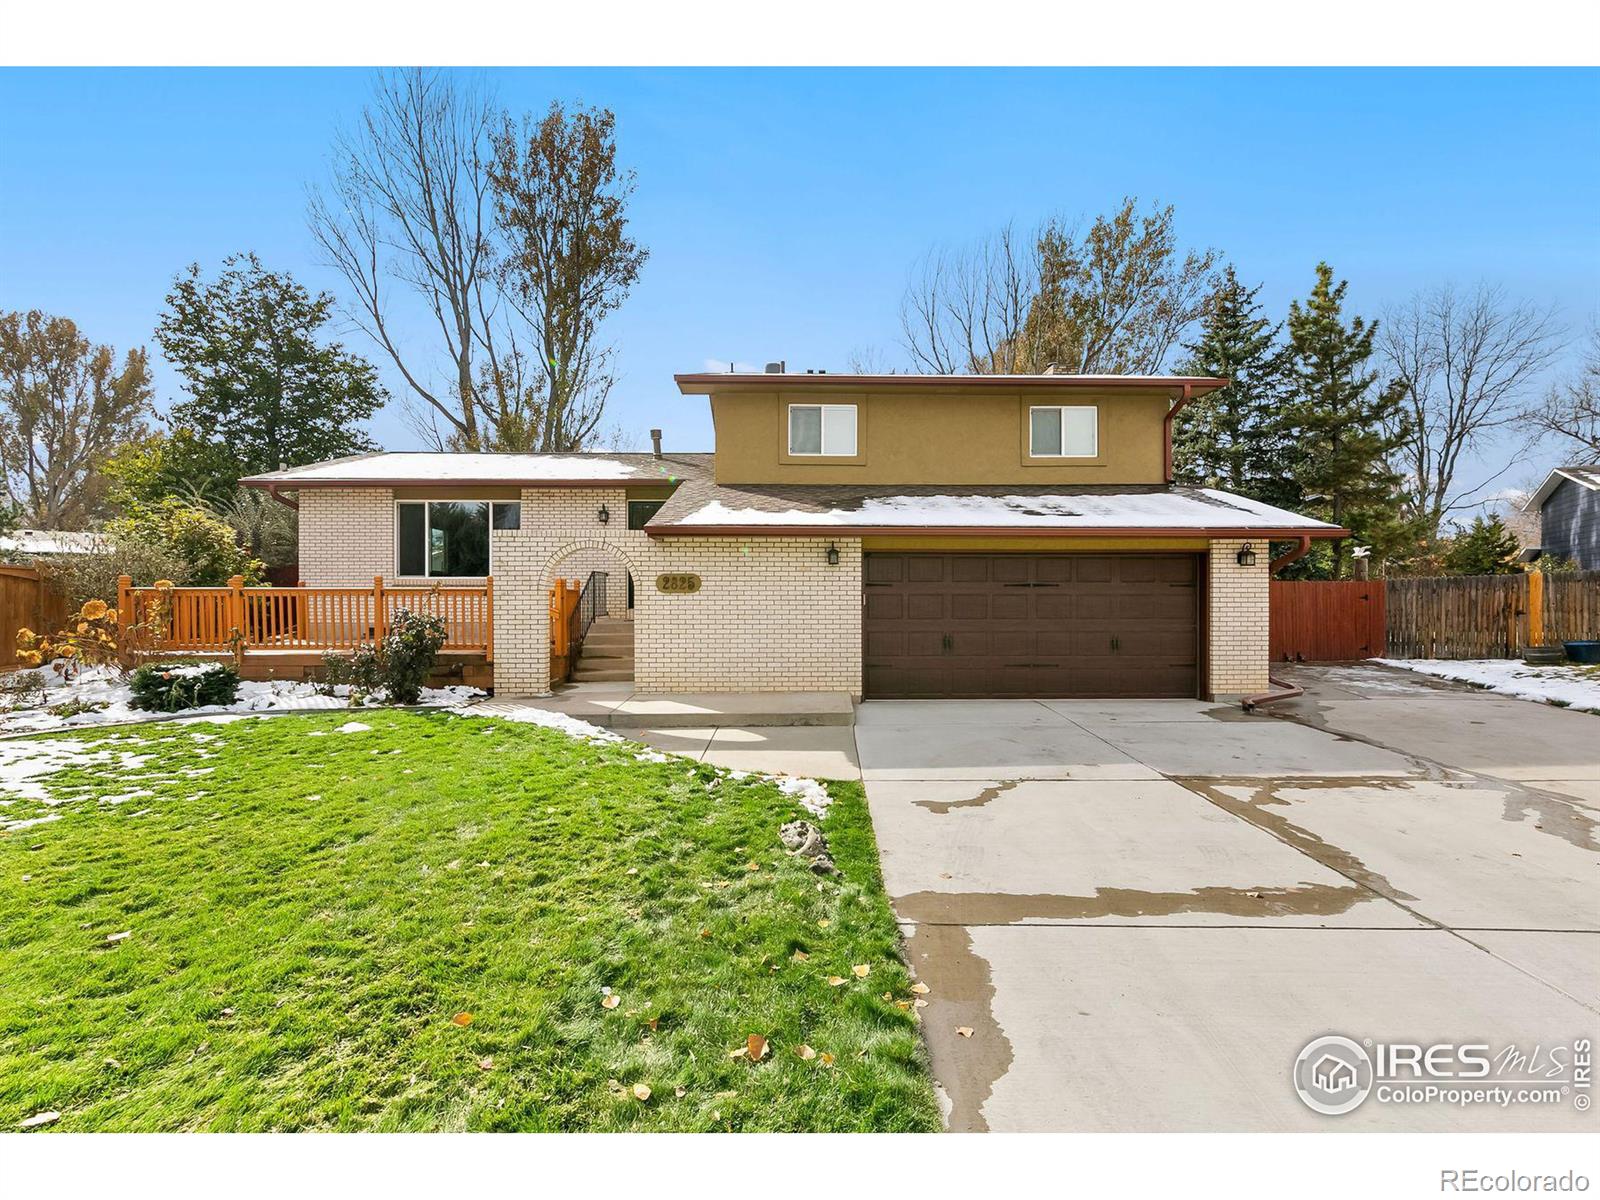 Report Image for 2825  Dundee Court,Fort Collins, Colorado